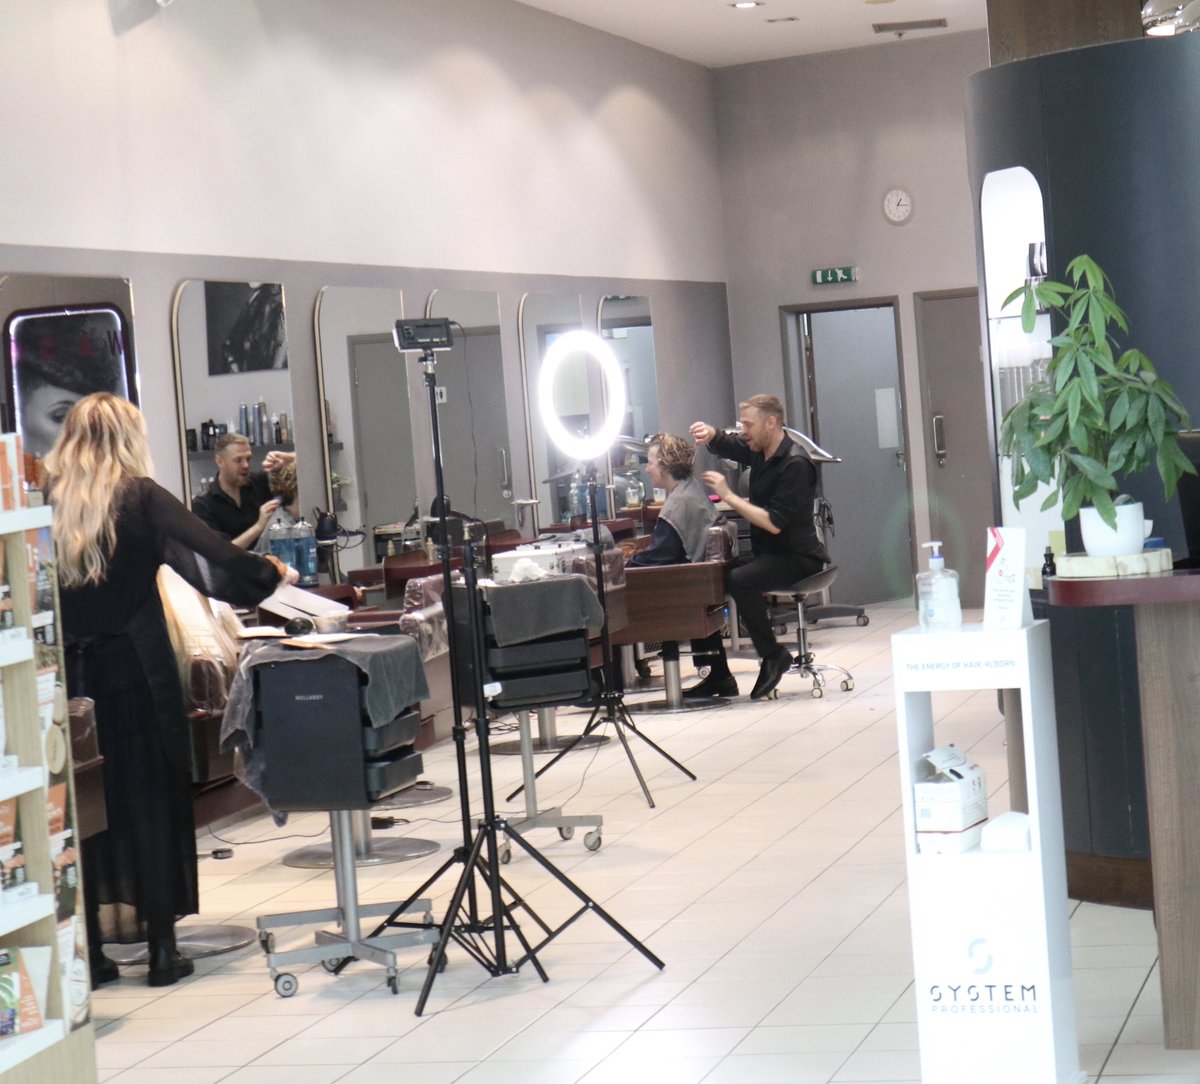 PKai Hair Hampton situated near to food court at Serpentine Green Shopping Centre. Enjoy a day of pampering, shopping and lunch. Plus free parking.⠀ Salon - #pkaihampton 01733 358835⠀ pkai.co.uk⠀ ⠀ #pkai #pkaihair #salon #hair #fashion #style #hairstyle